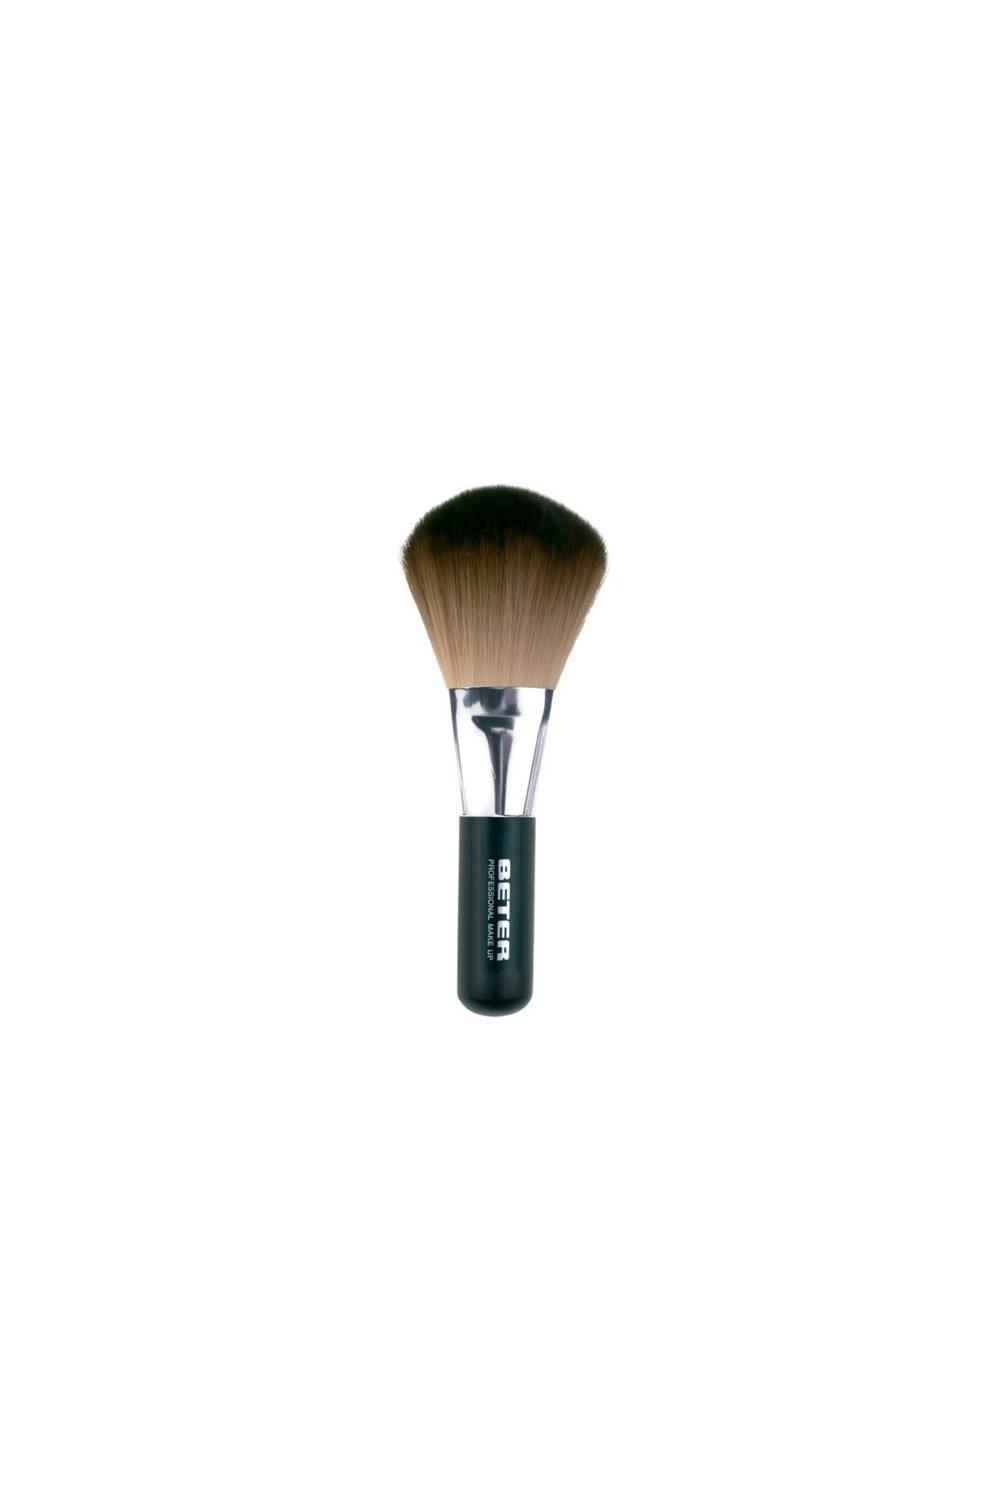 Beter Make Up Brush Synthetic Hair